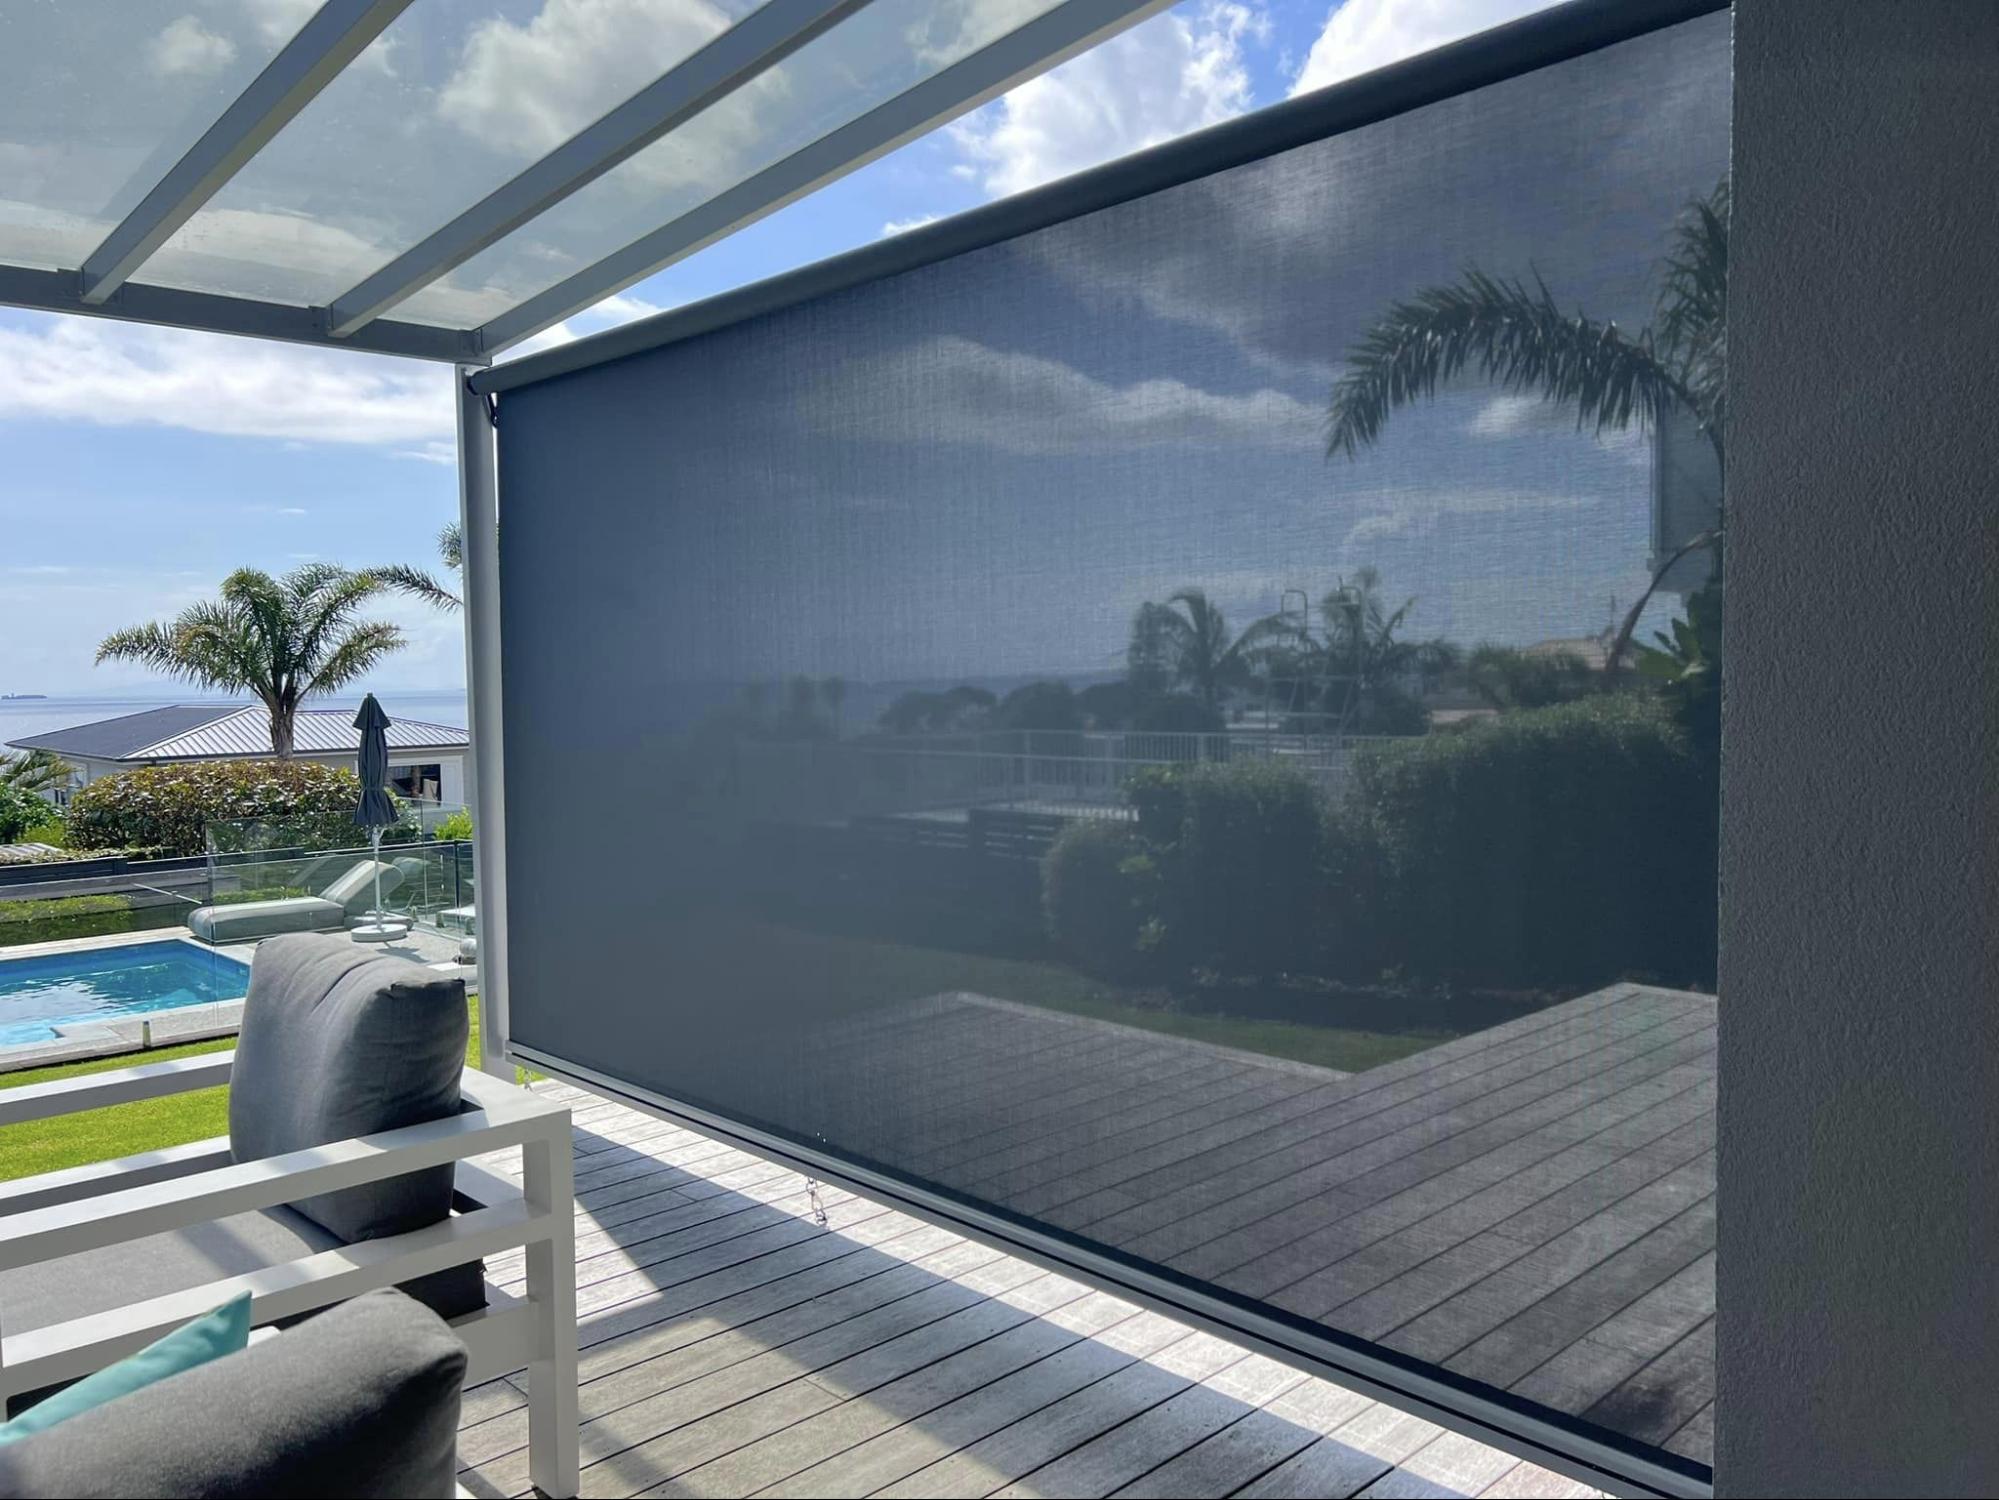 Privacy Screens for Decks in New Zealand image1